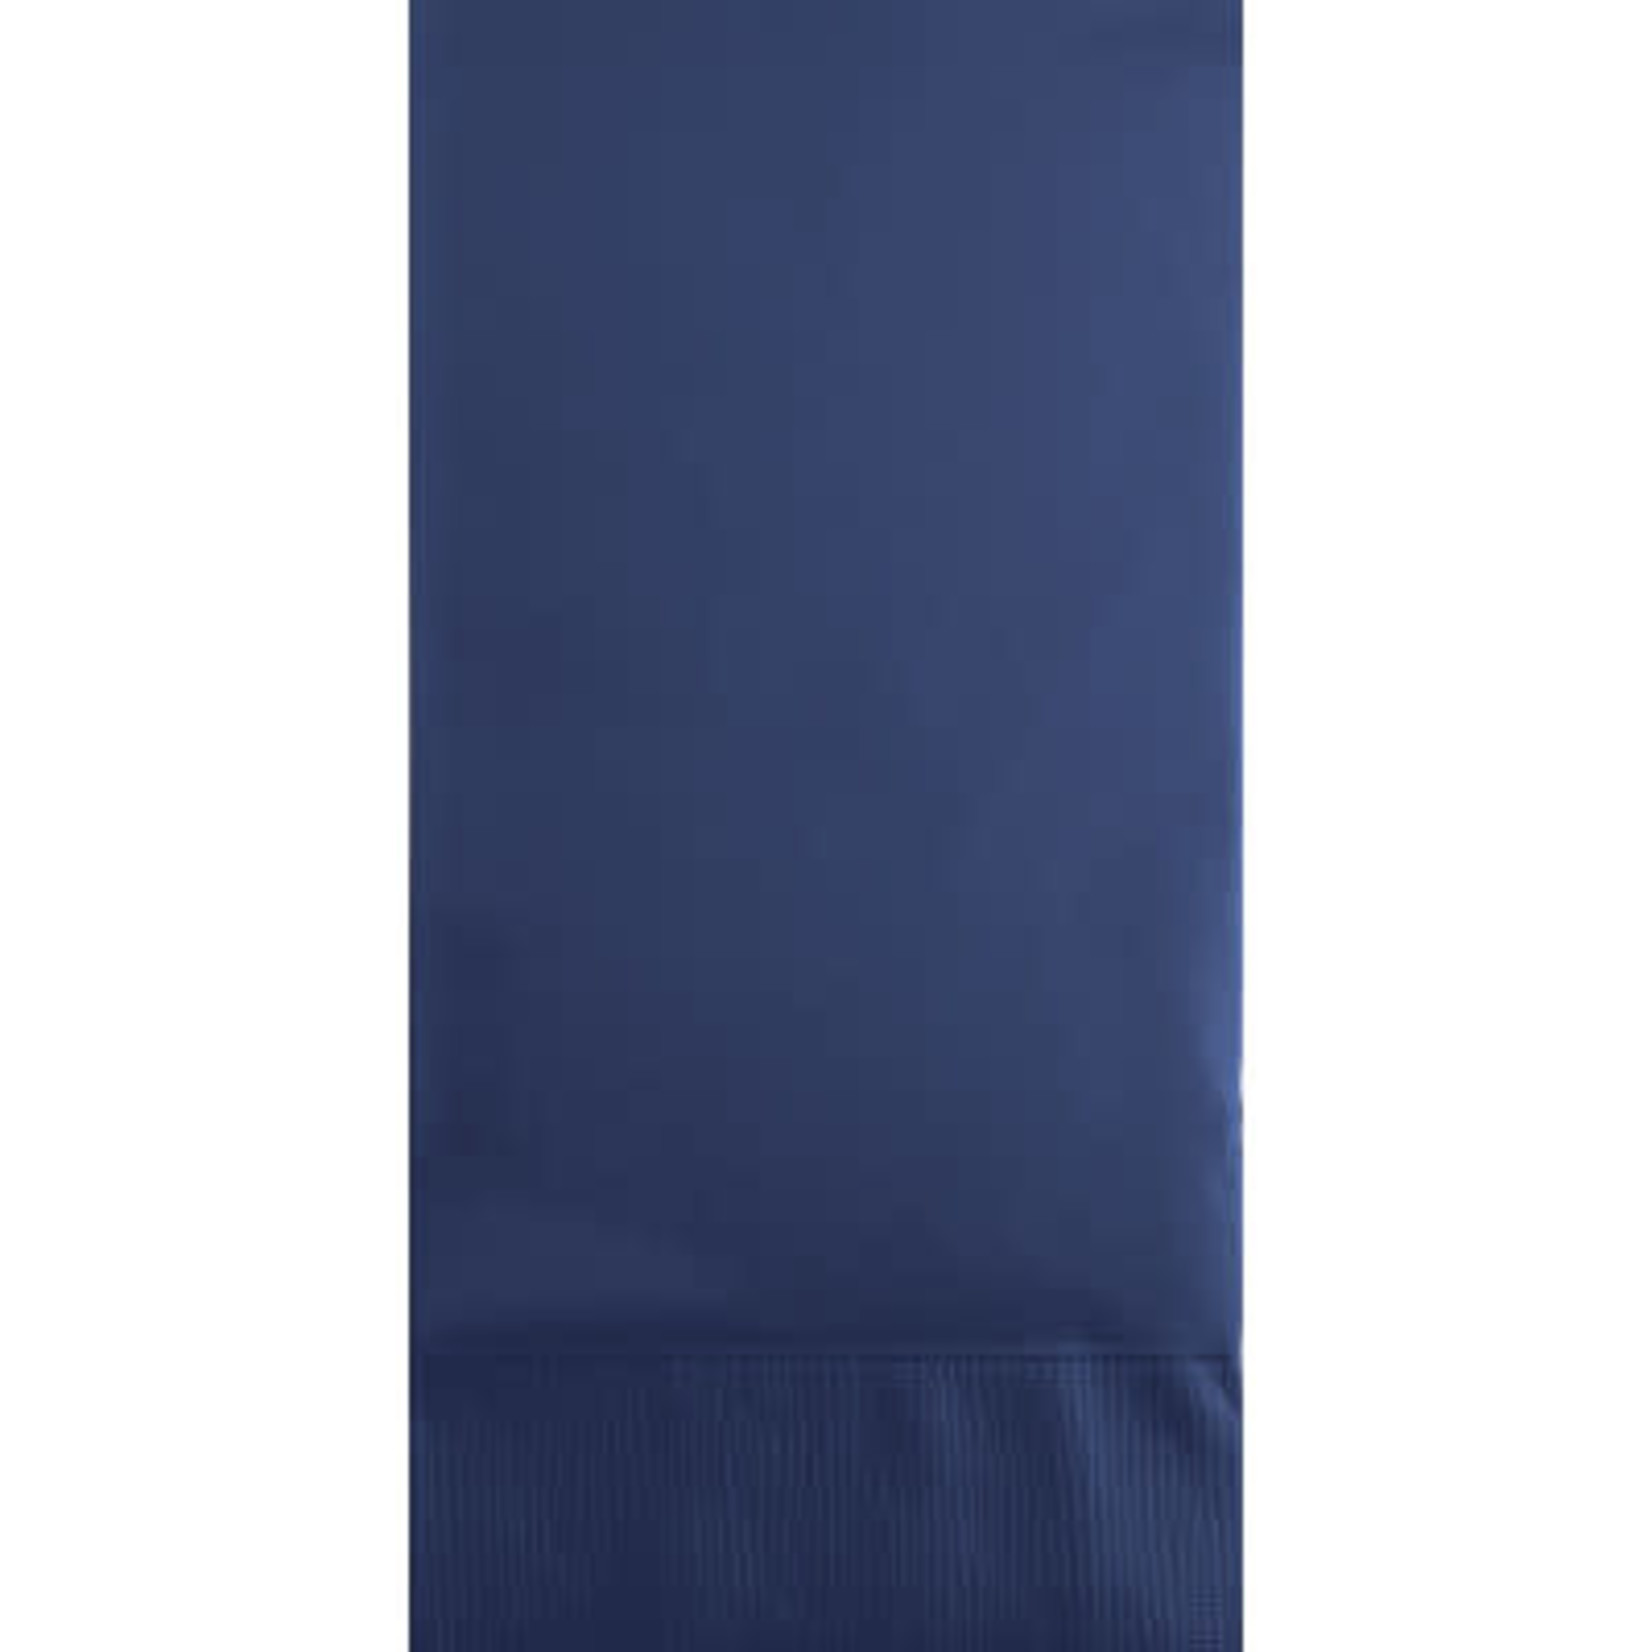 Touch of Color Navy Blue 3-Ply Guest Towels - 16ct.